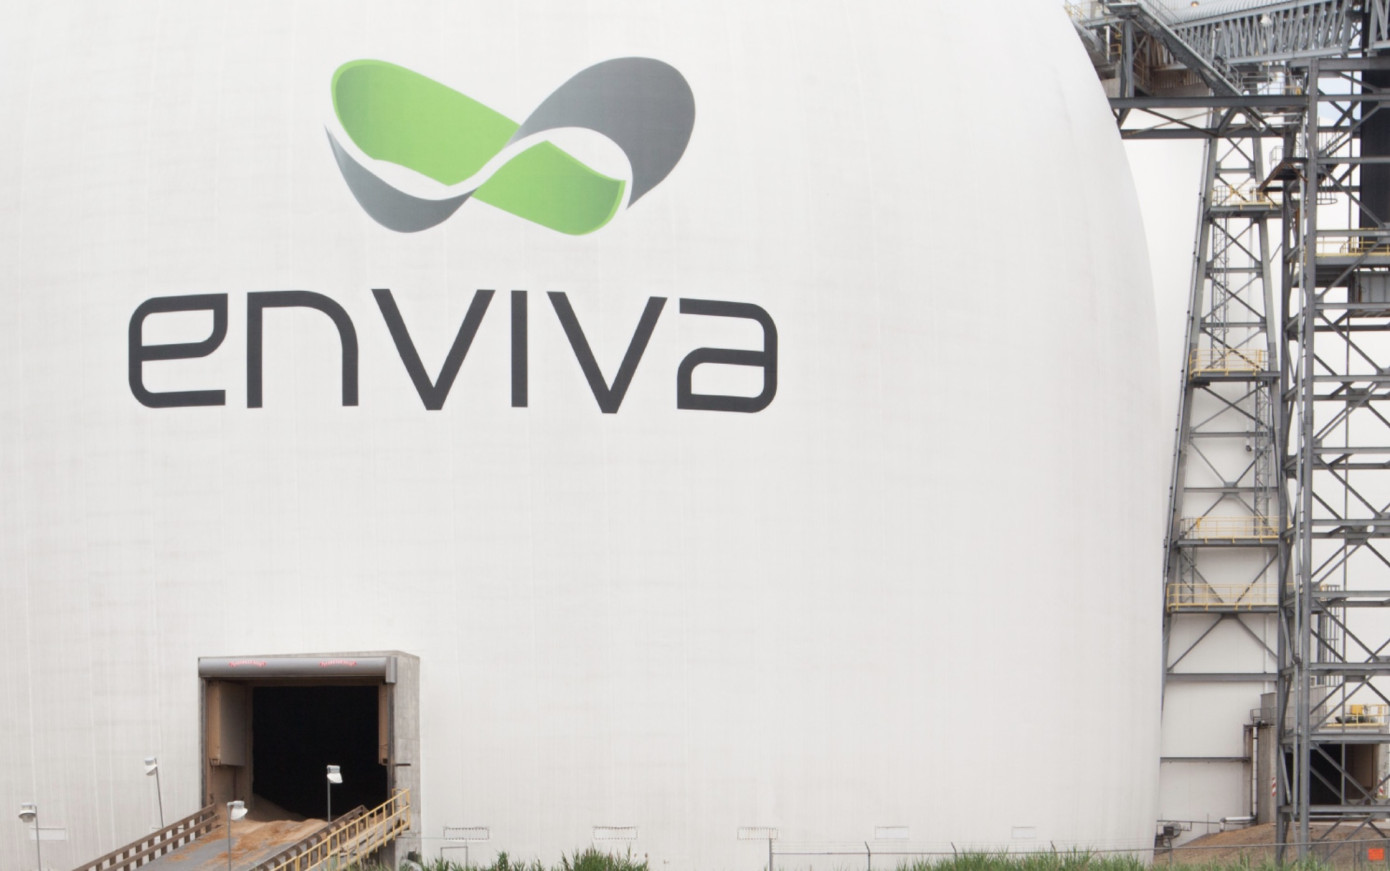 Enviva faces potential delisting warning from NYSE over share price concerns